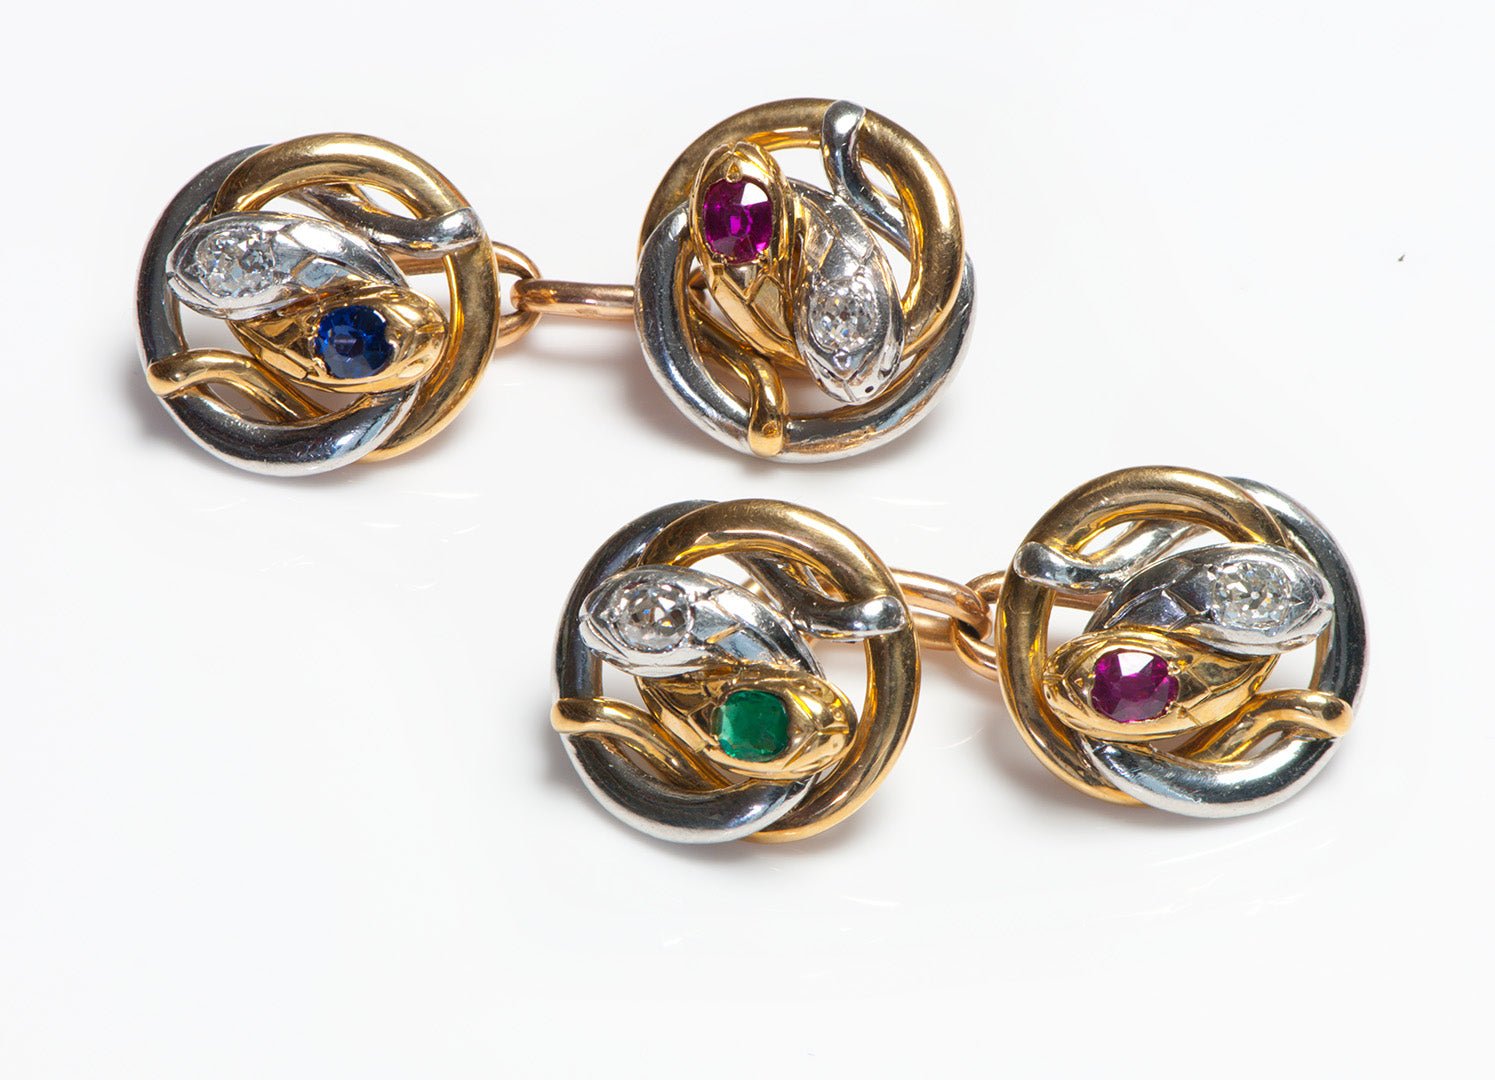 Antique French 18K Gold Diamond Emerald Ruby Sapphire Snake Cufflinks - DSF Antique Jewelry